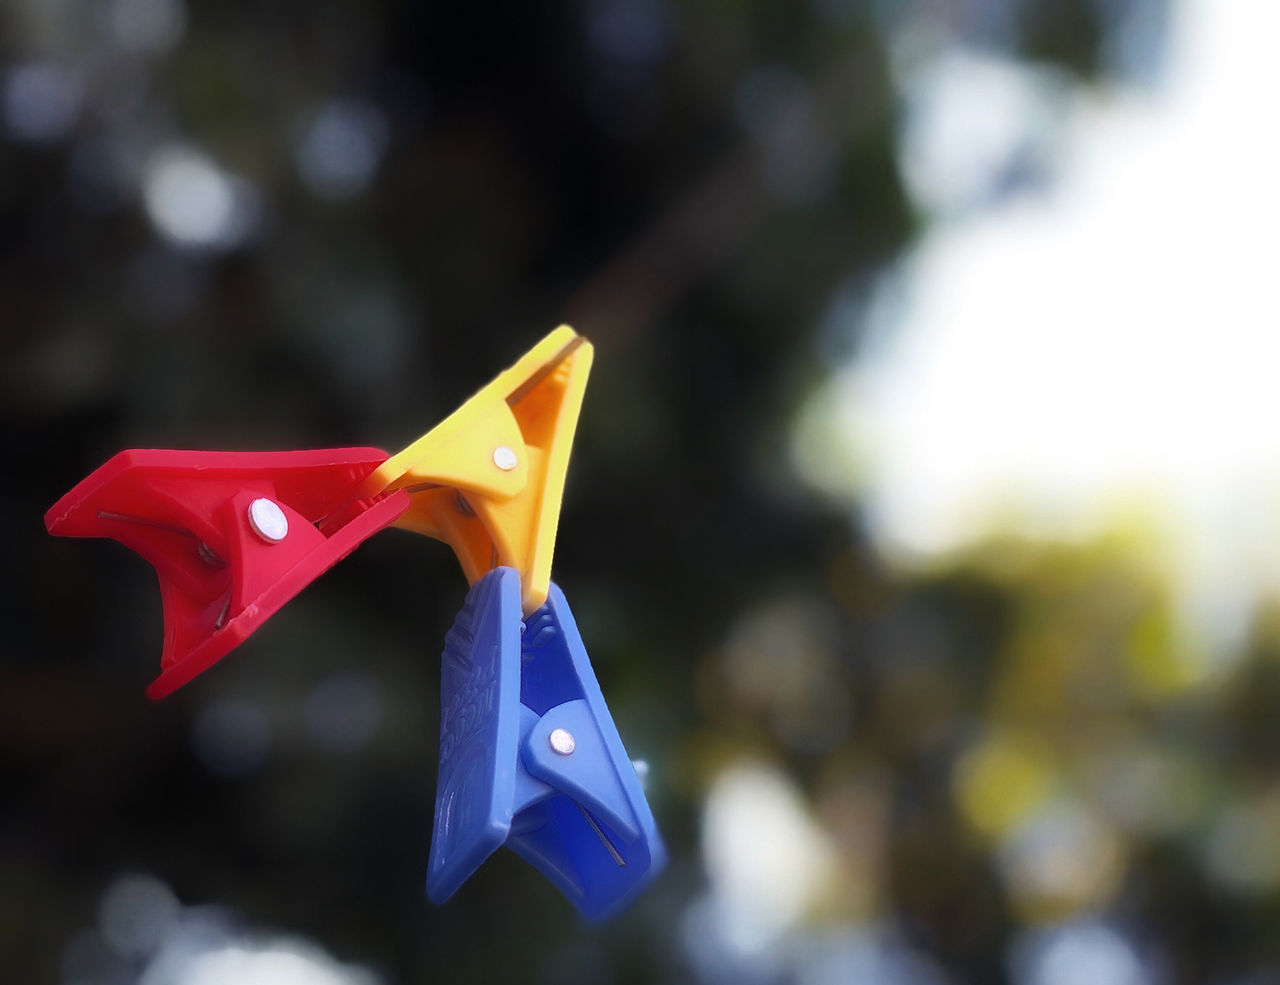 CLOSE-UP OF PAPER TOY HANGING ON ROPE